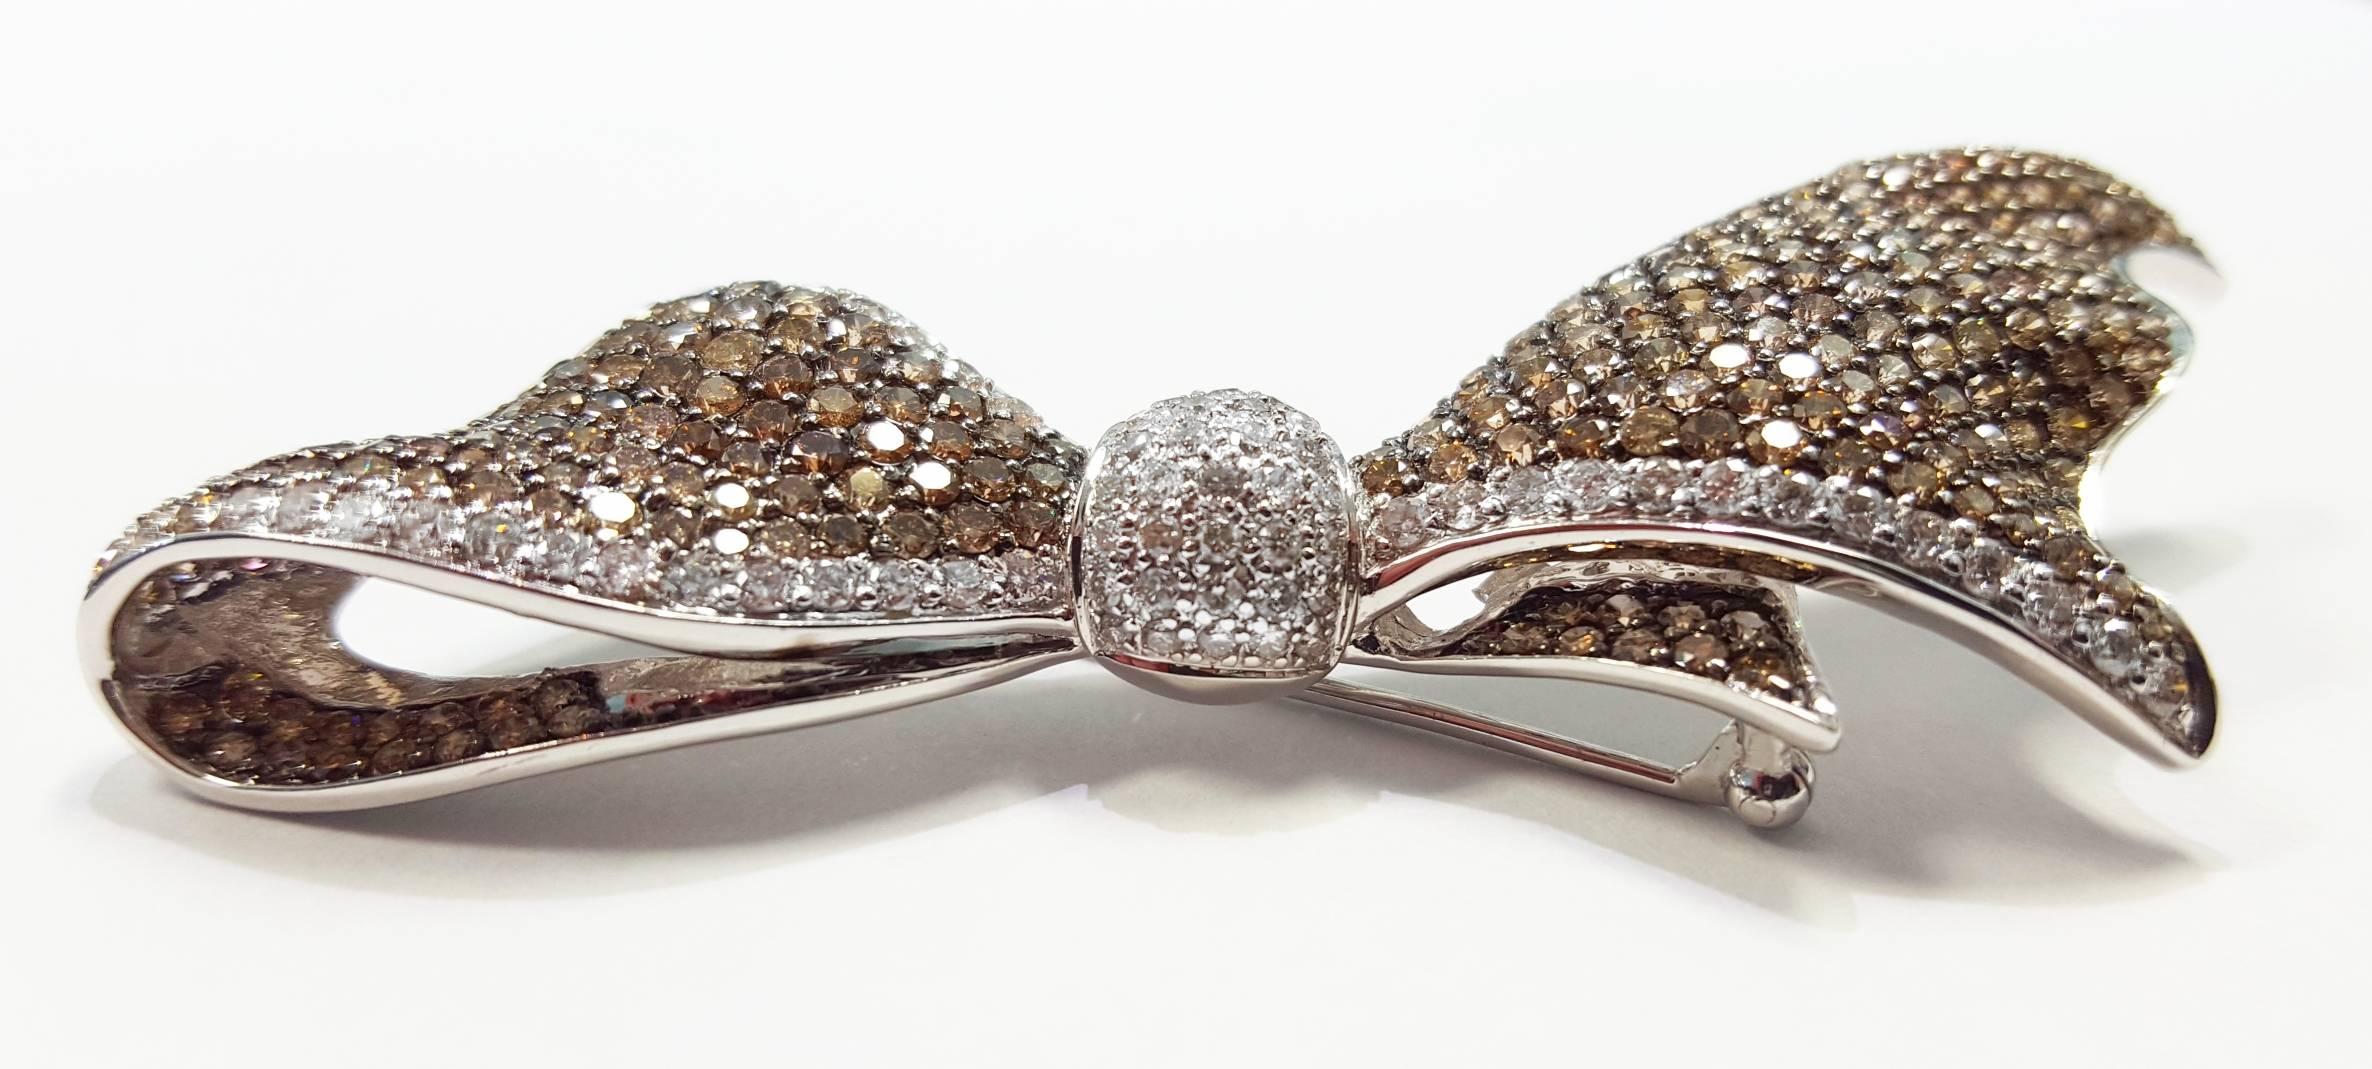 A white gold bow pin set with 280 round brilliant cut diamonds. The diamonds are fancy brown color and white. The diamonds have a total weight of 6.58cttw. The pin measures 3 inches long and 1 inch wide. The pin weighs 10.8dwt